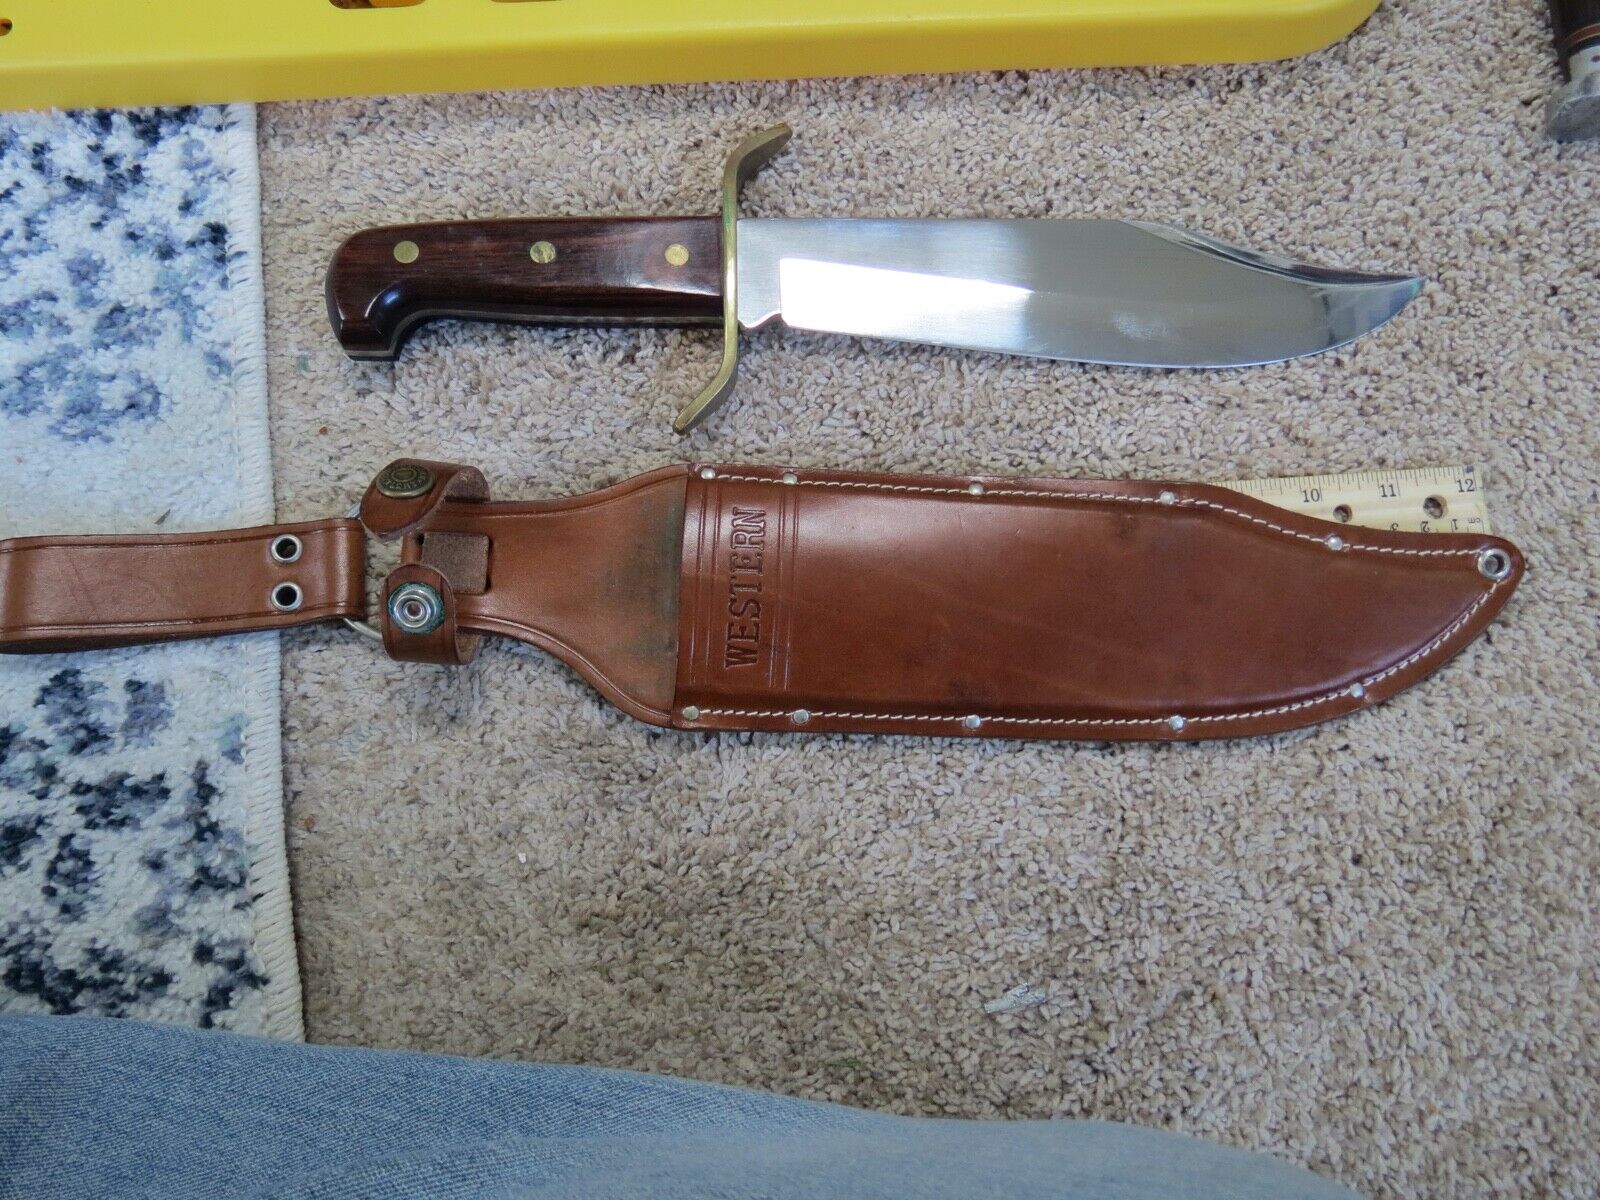 Vintage Western W49 Bowie knife made in USA with sheath (lot#18063)